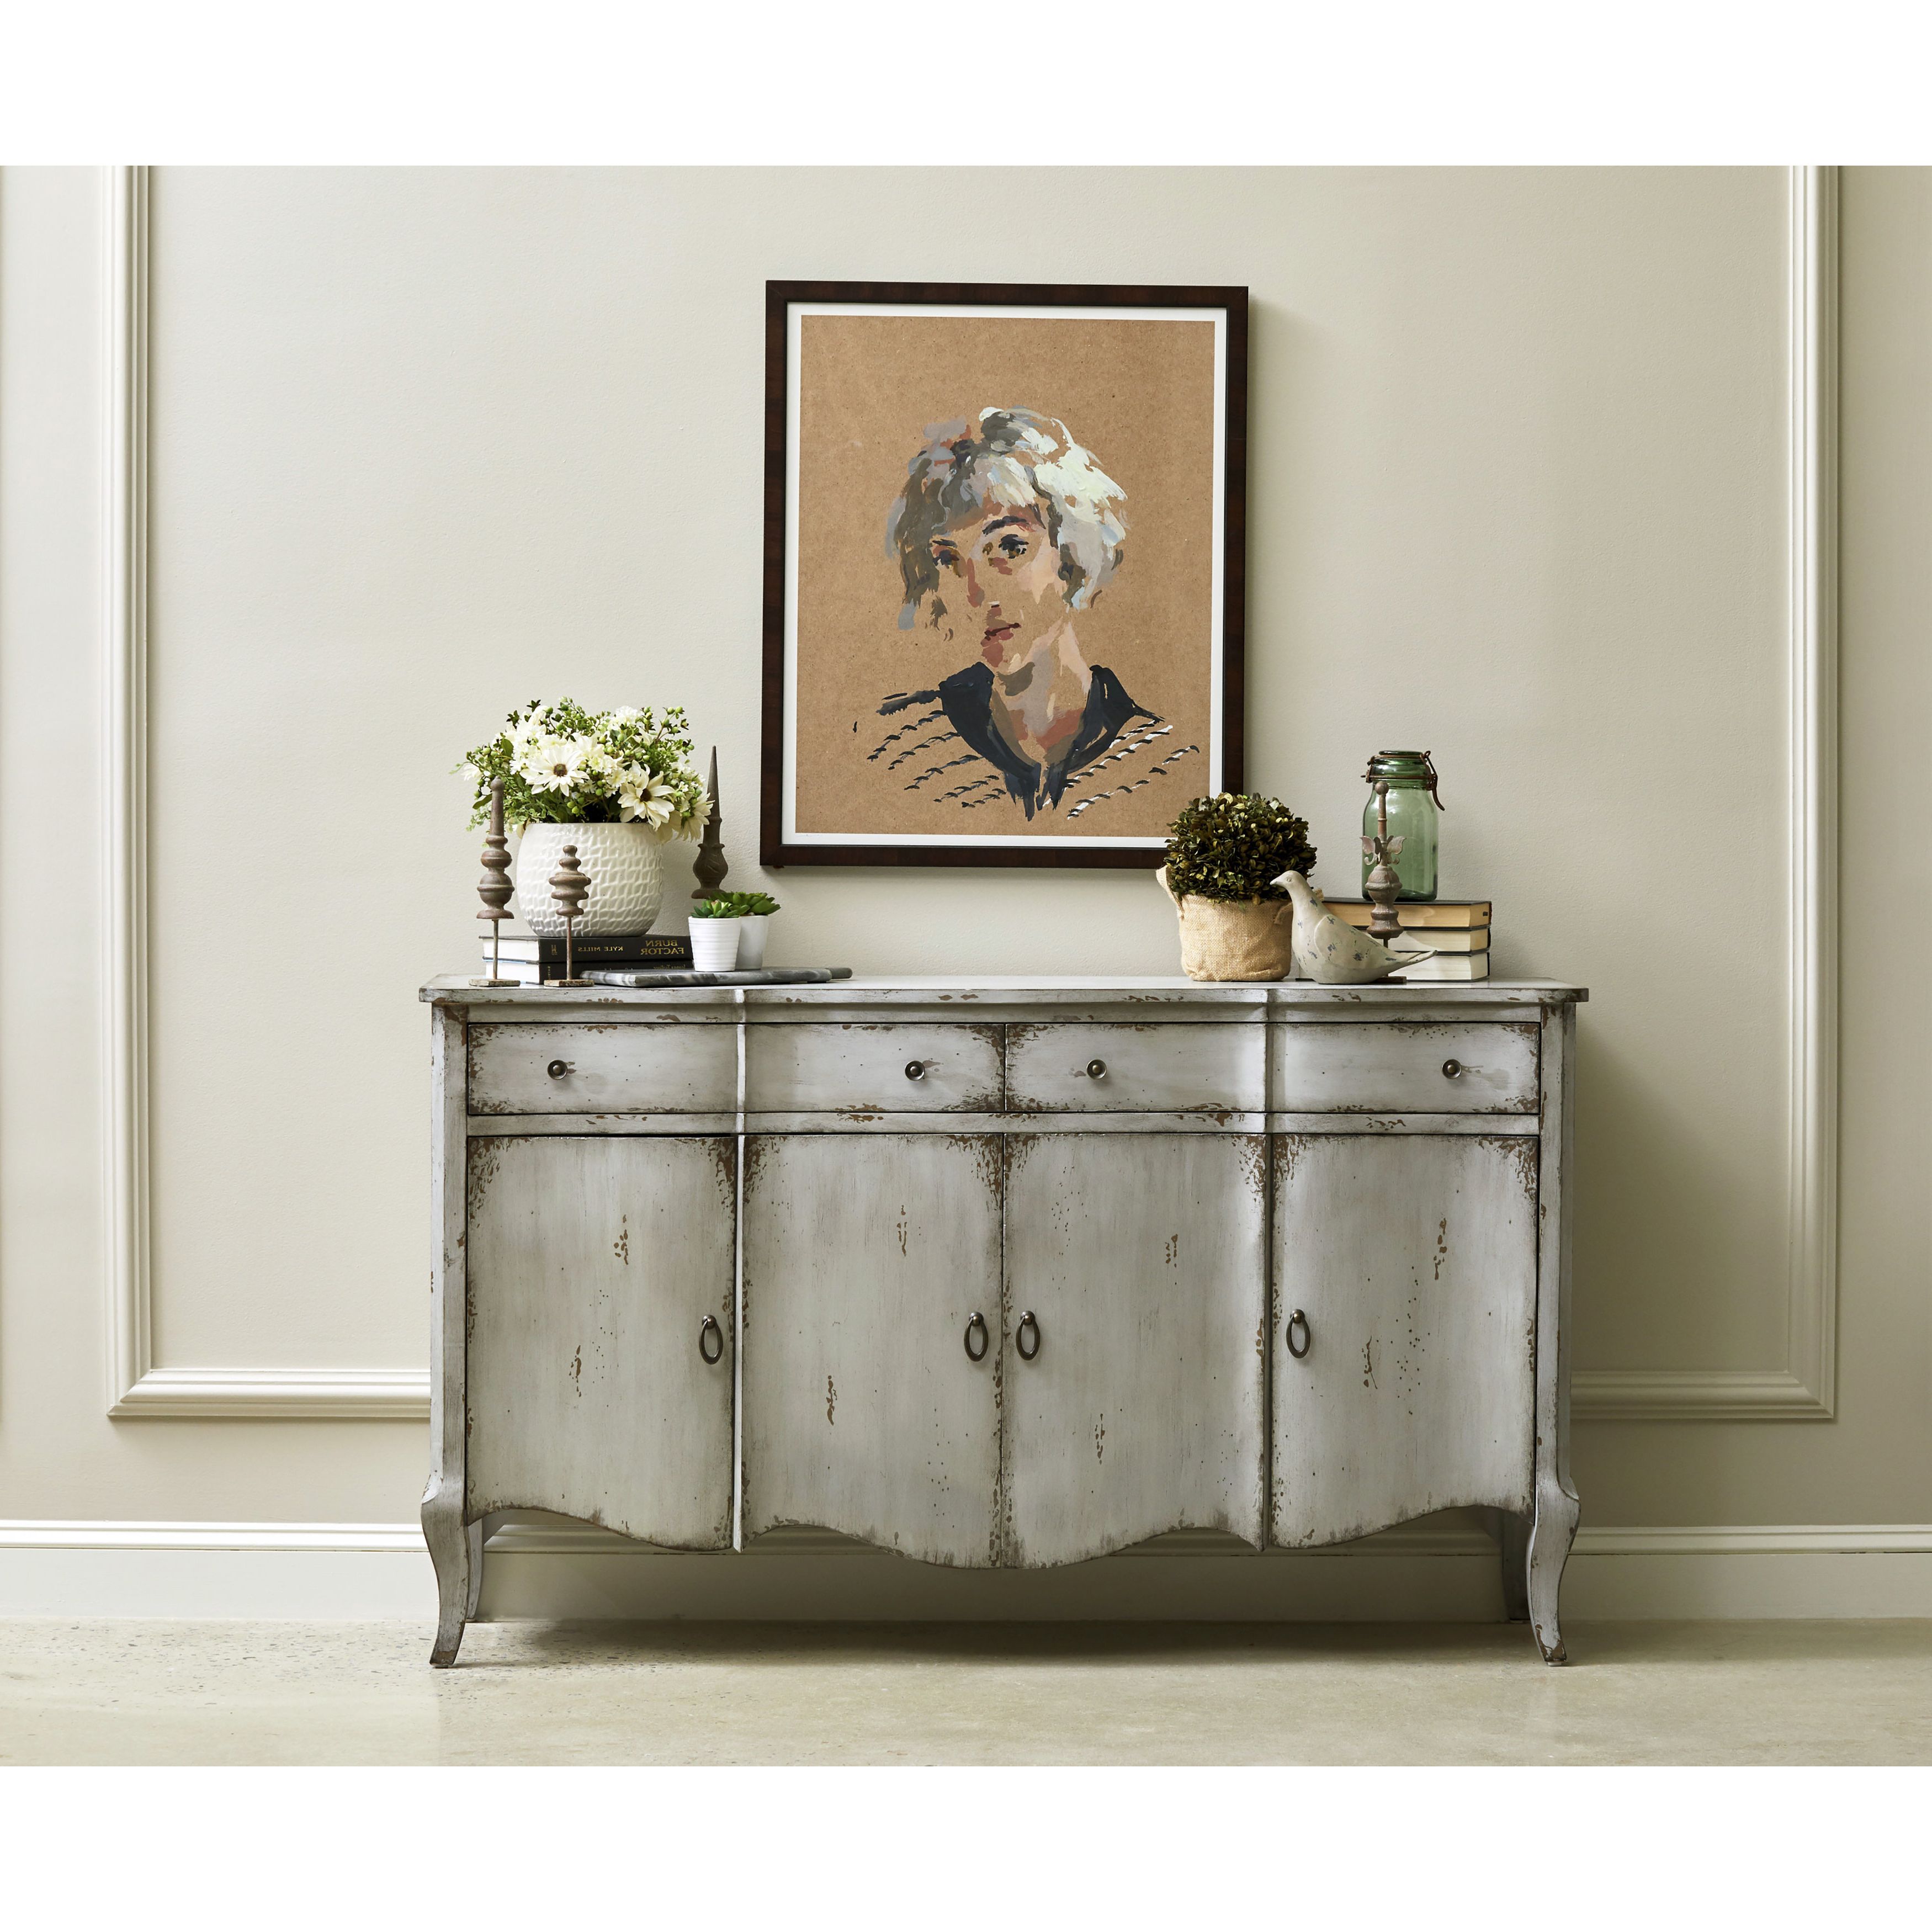 Shallow Depth Credenza | Wayfair Intended For Barr Credenzas (Gallery 4 of 20)